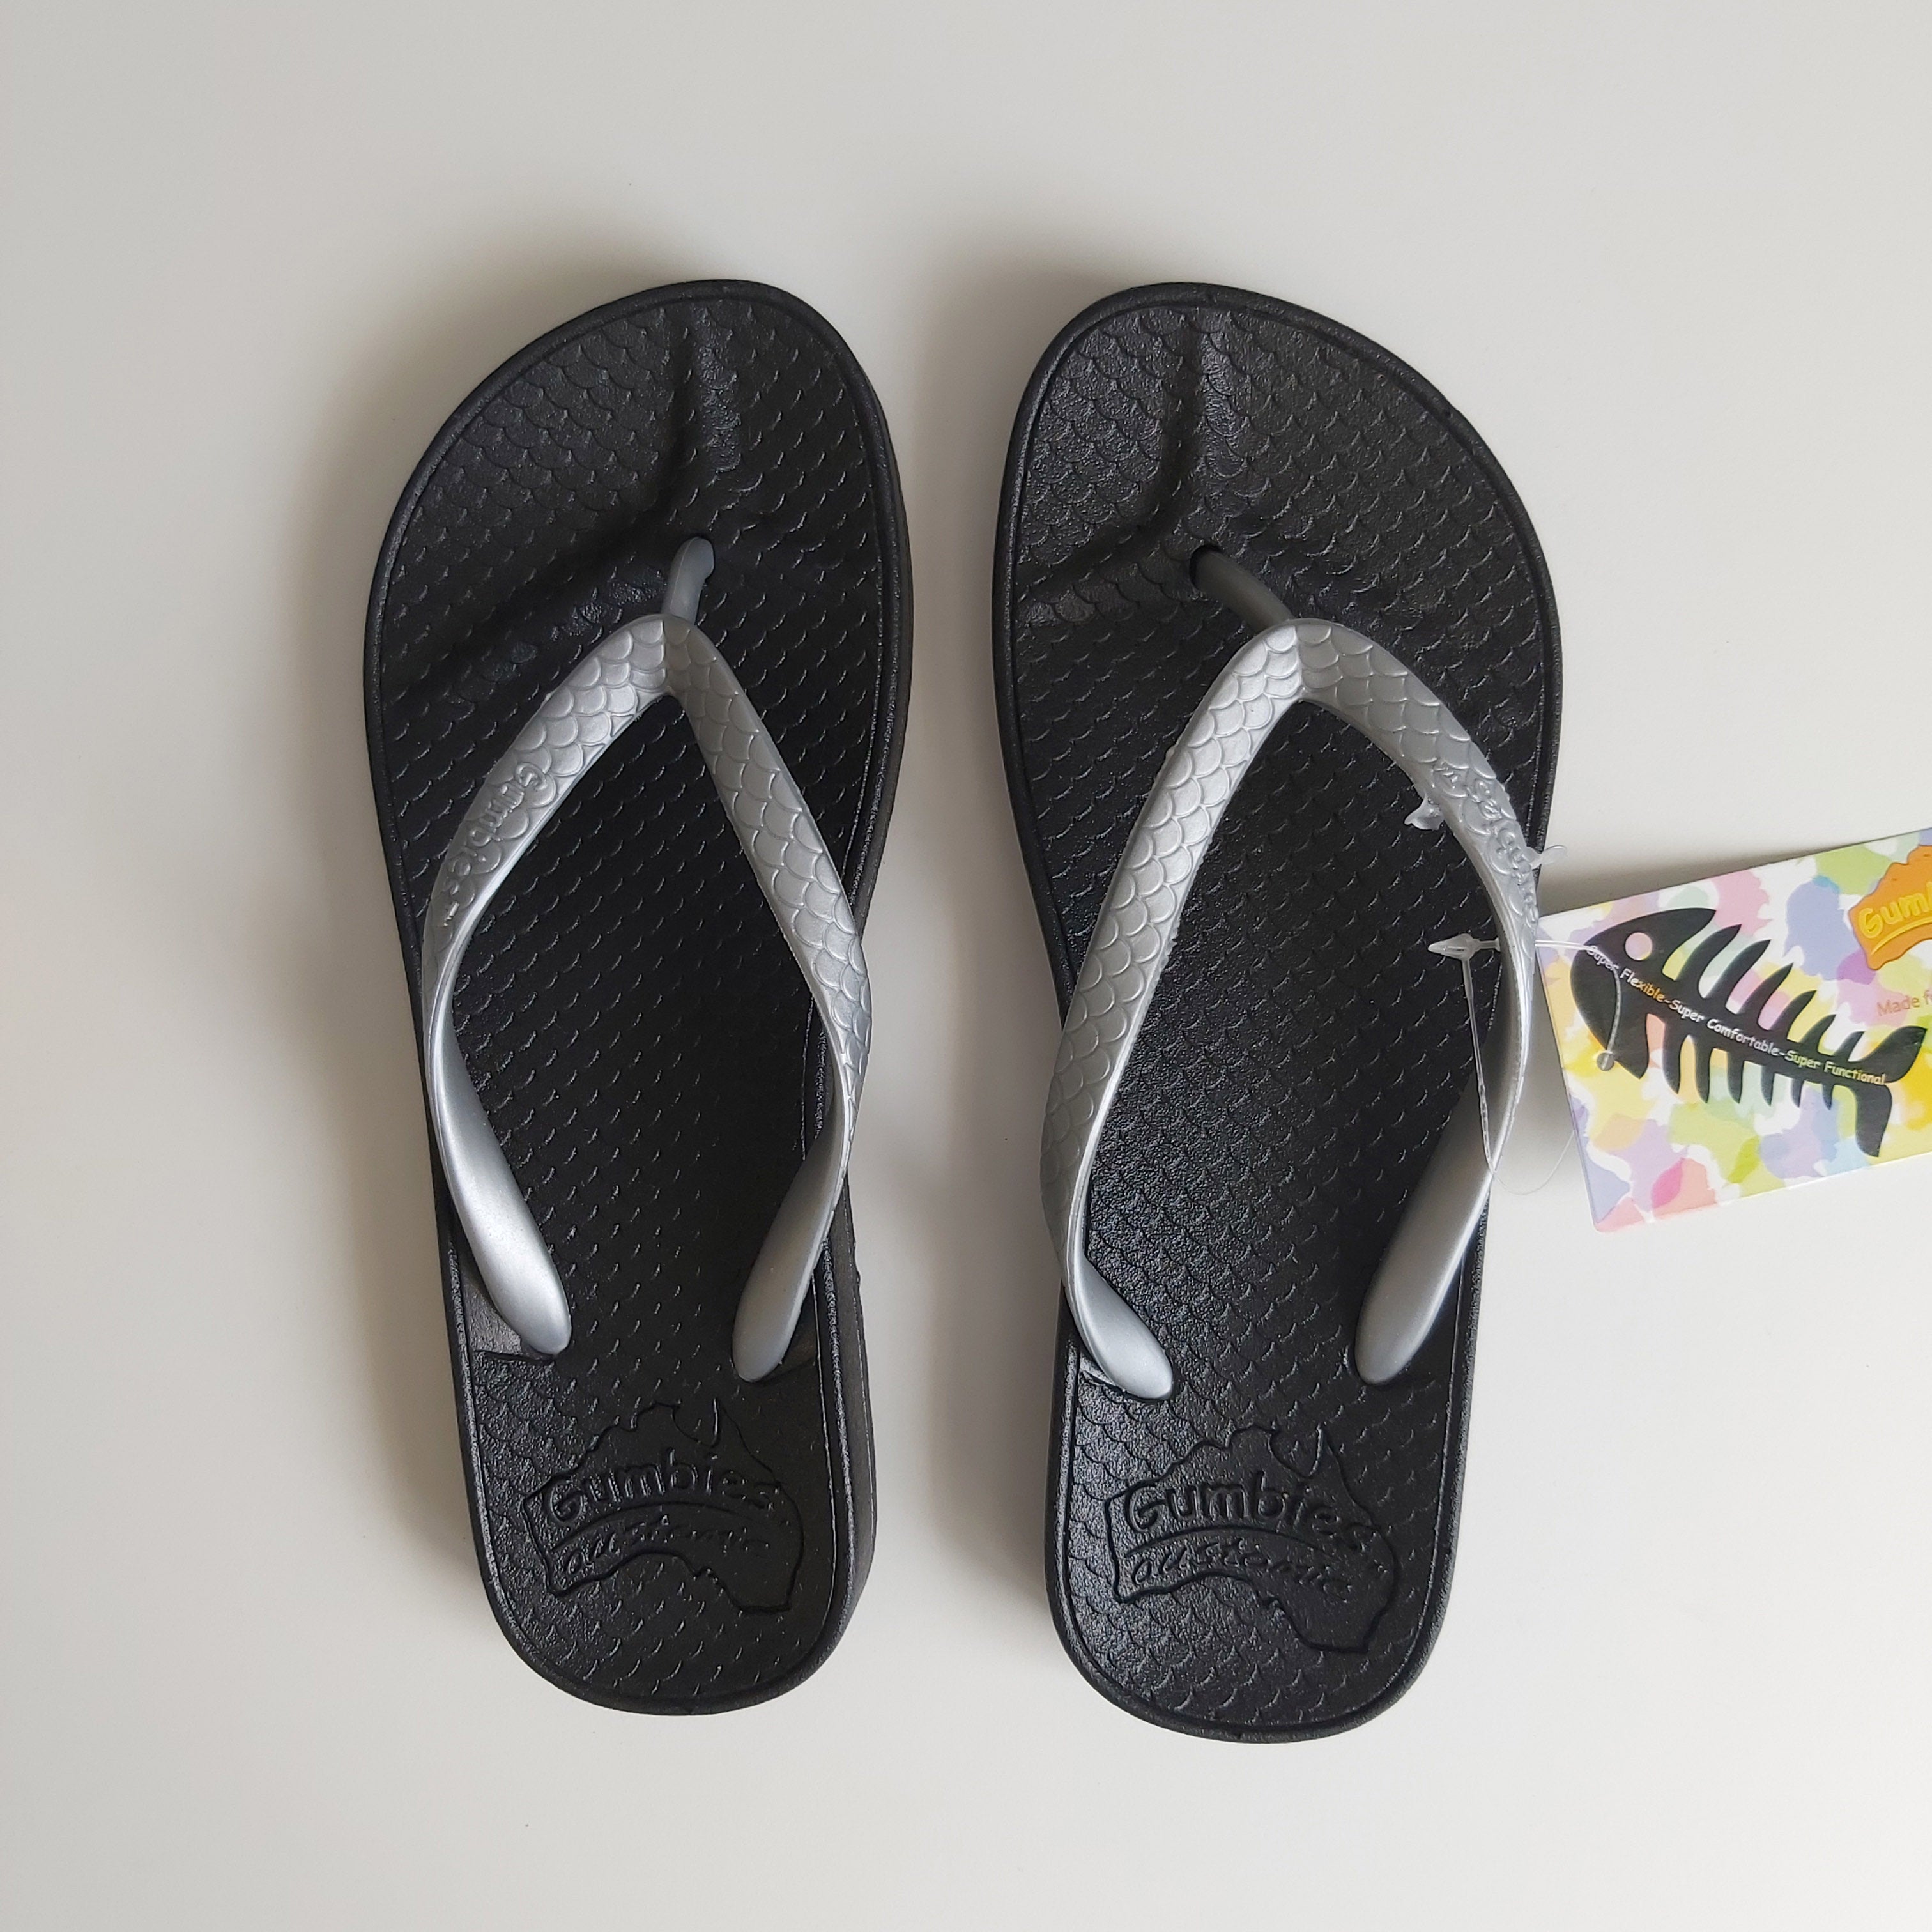 Gumbies Flip Flops -Black with Silver Strap UK Size 2/3